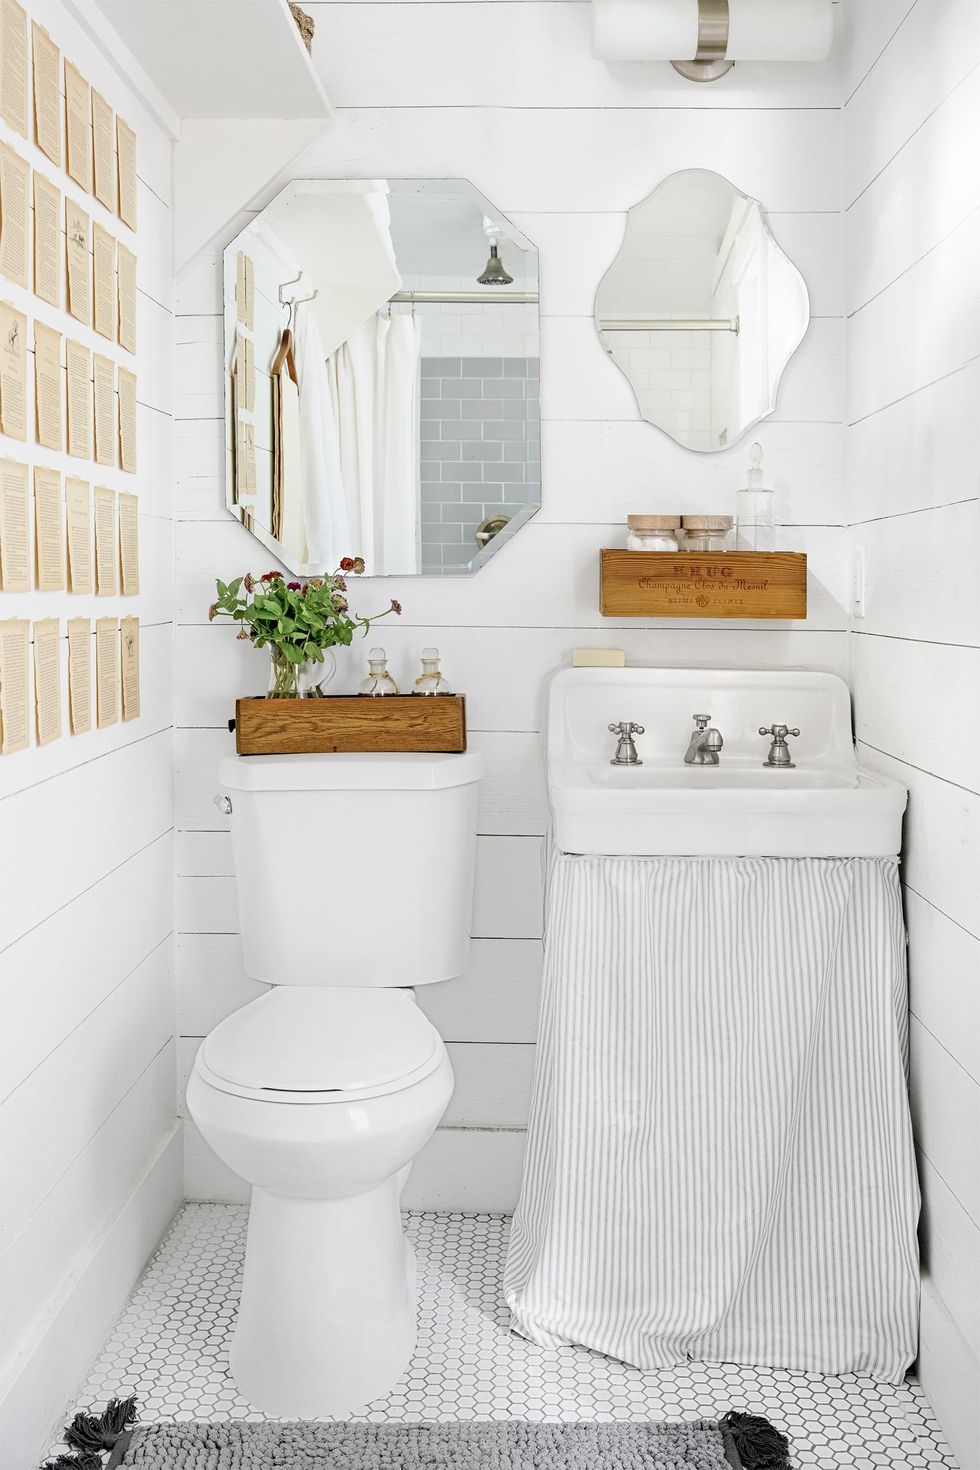 Big Tile or Little Tile? How to Design for Small Bathrooms and